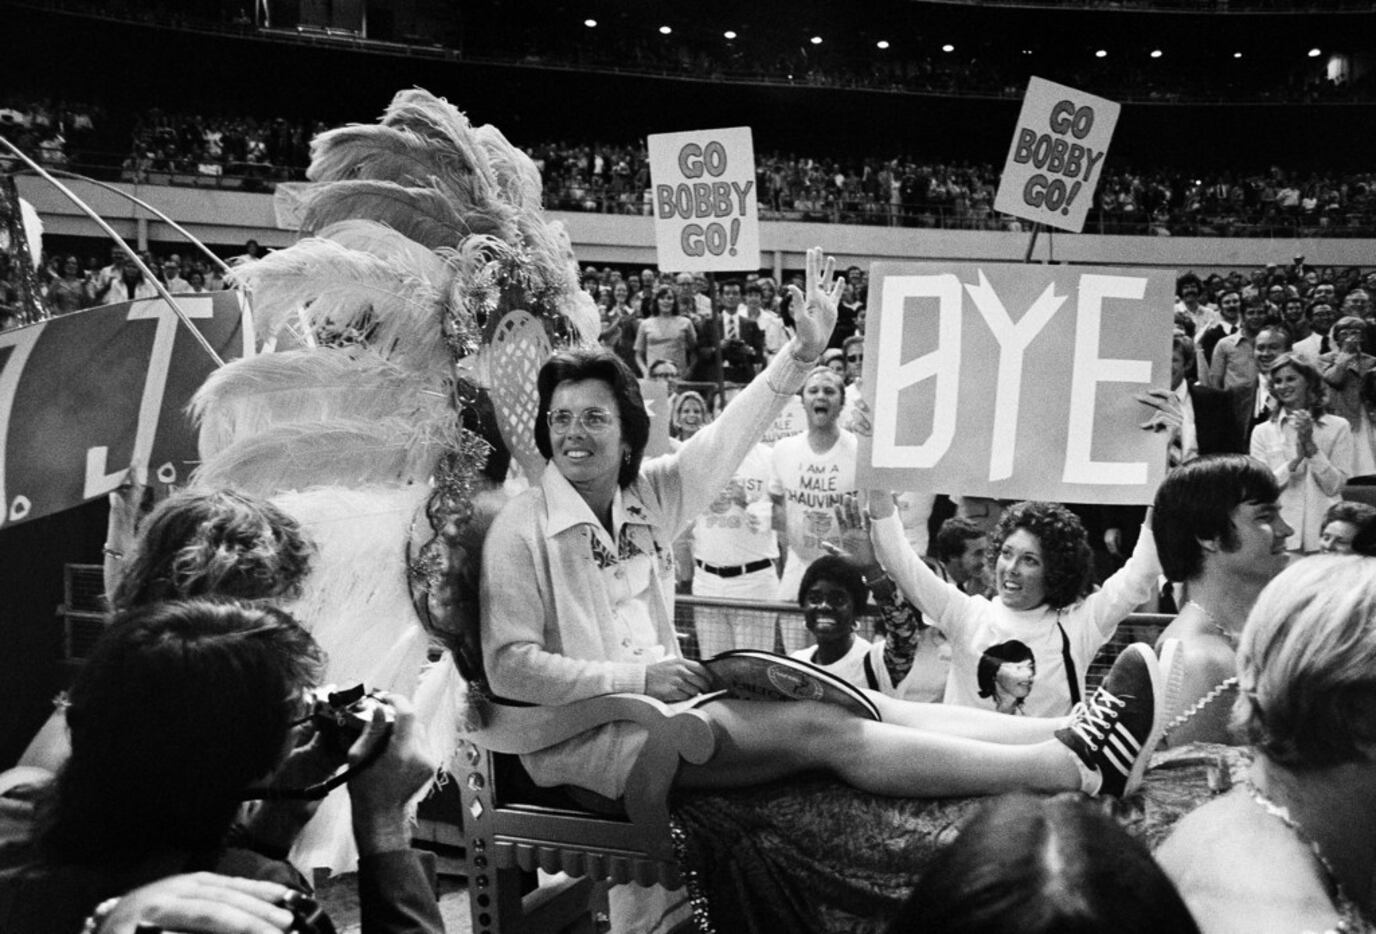 Billie Jean King waves to crowds at the Astrodome in Houston, Texas, as she is borne onto...